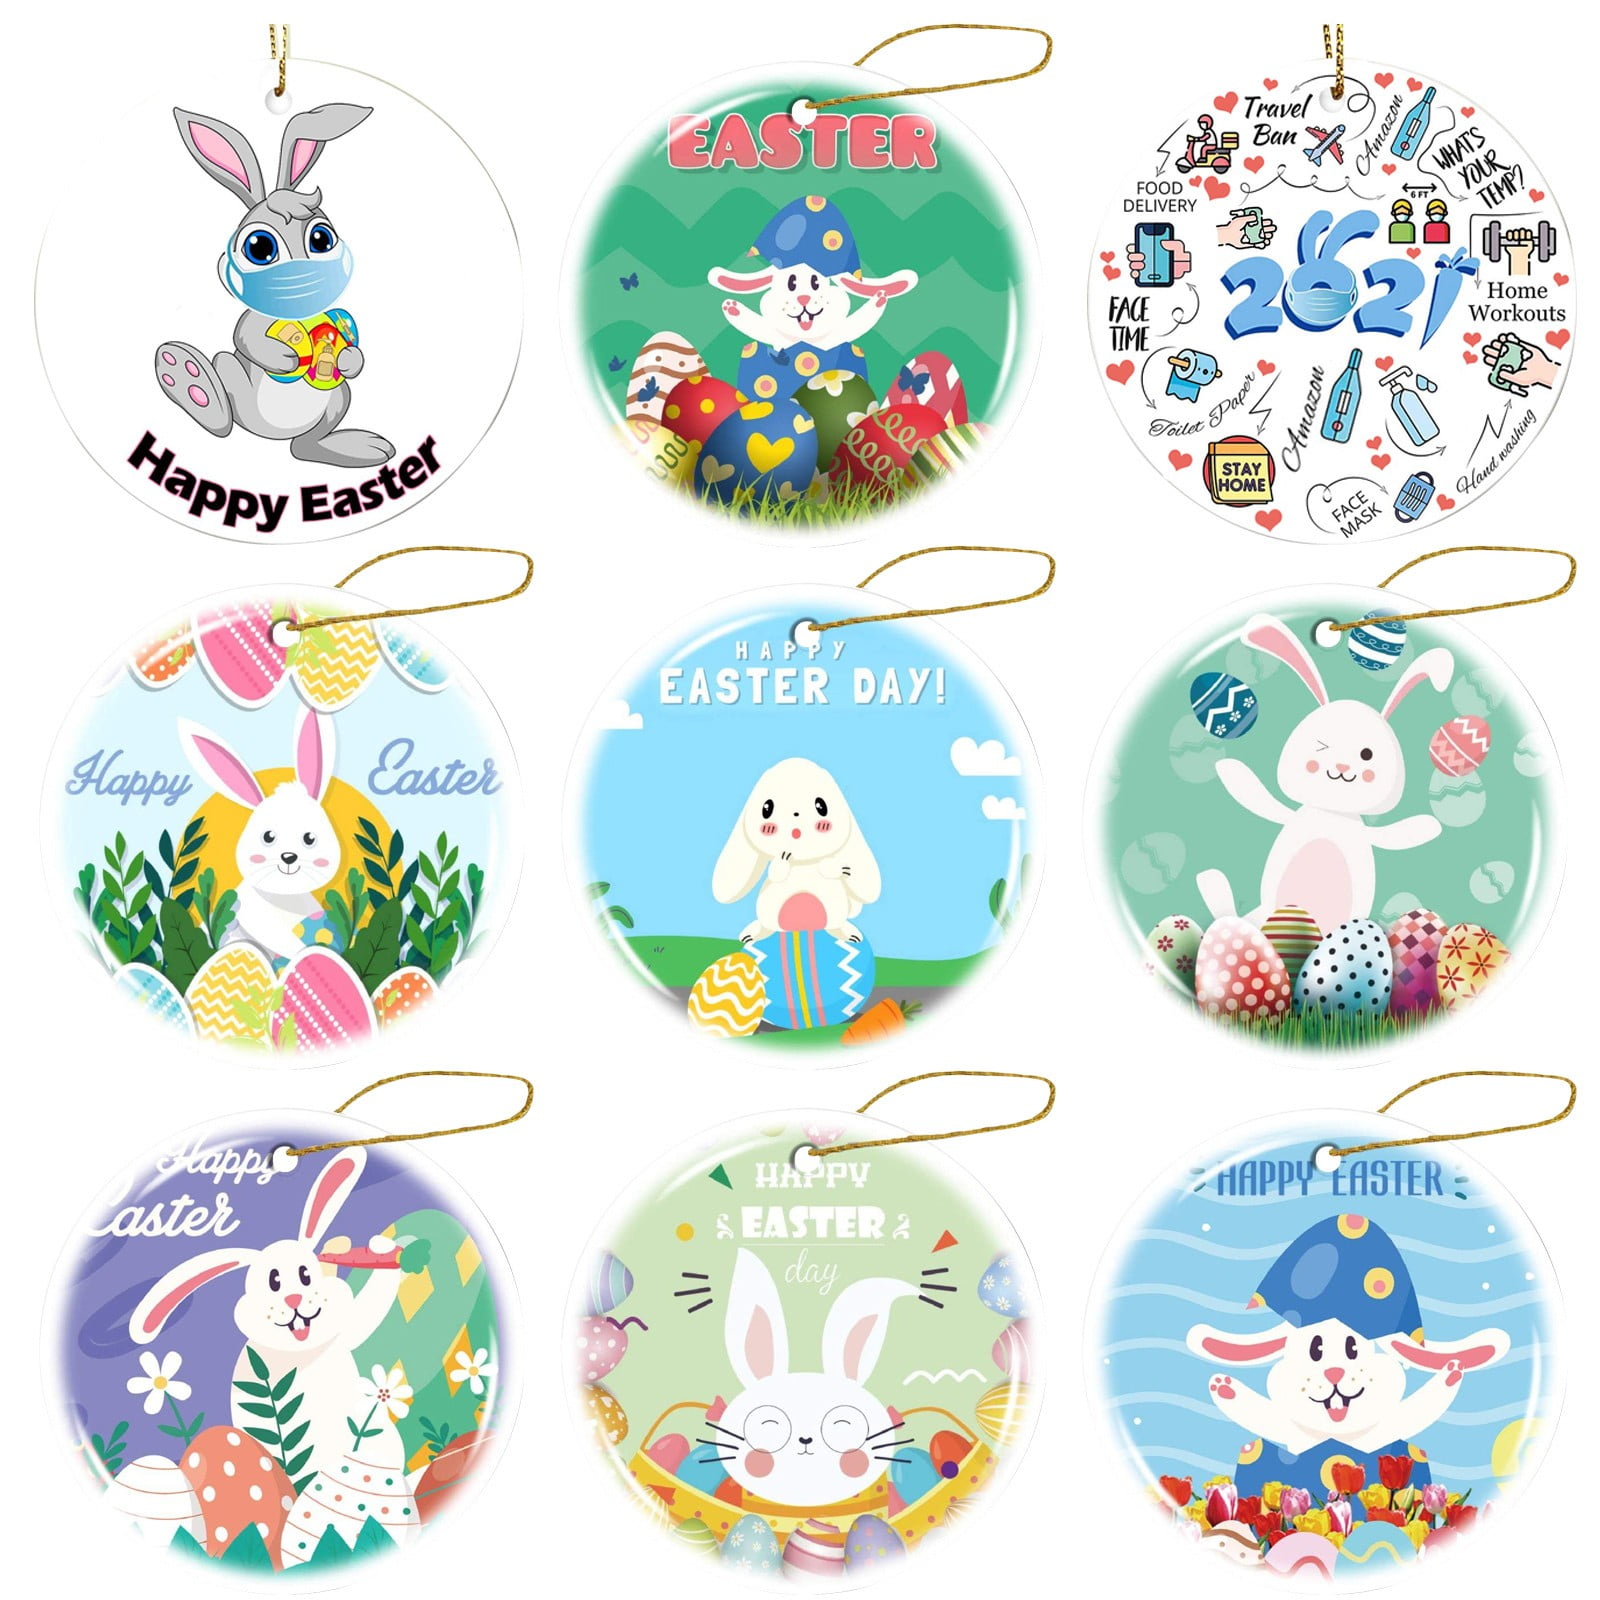 Gnome Easter 2021 Happy Easter Round Rug 